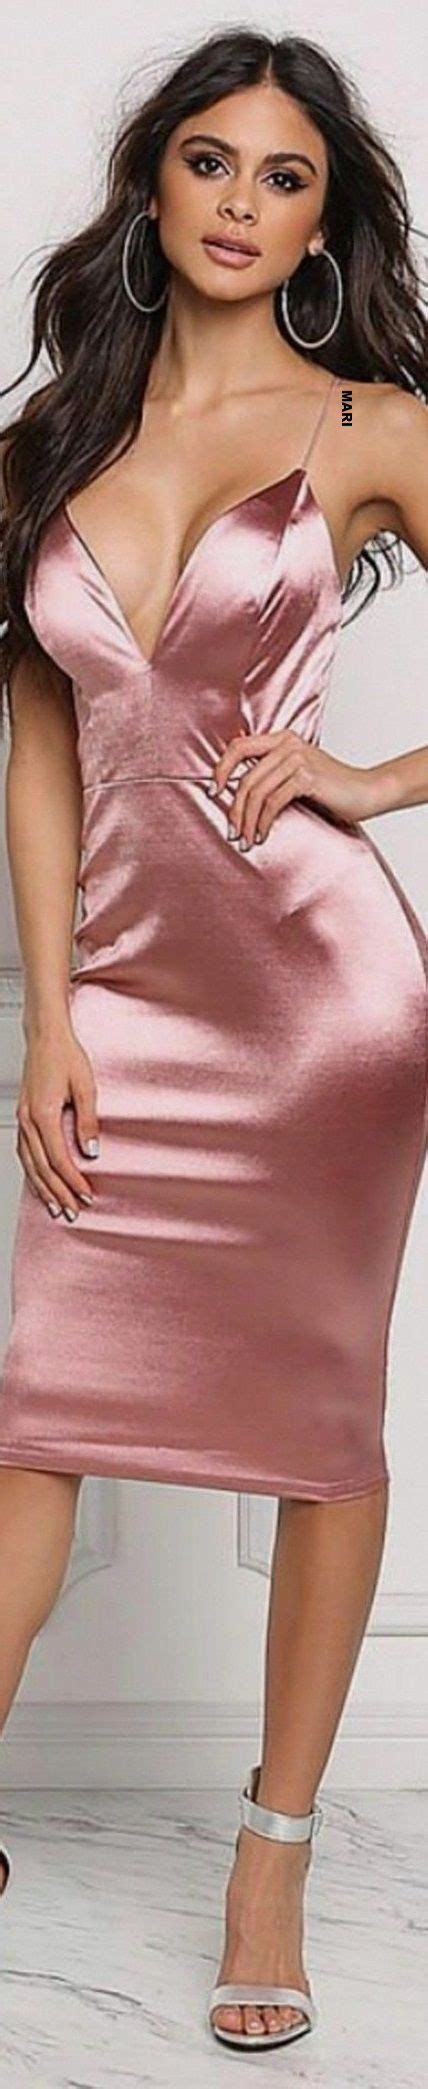 Pin By Mary On Amo Rosa In Fashion Bodycon Dress